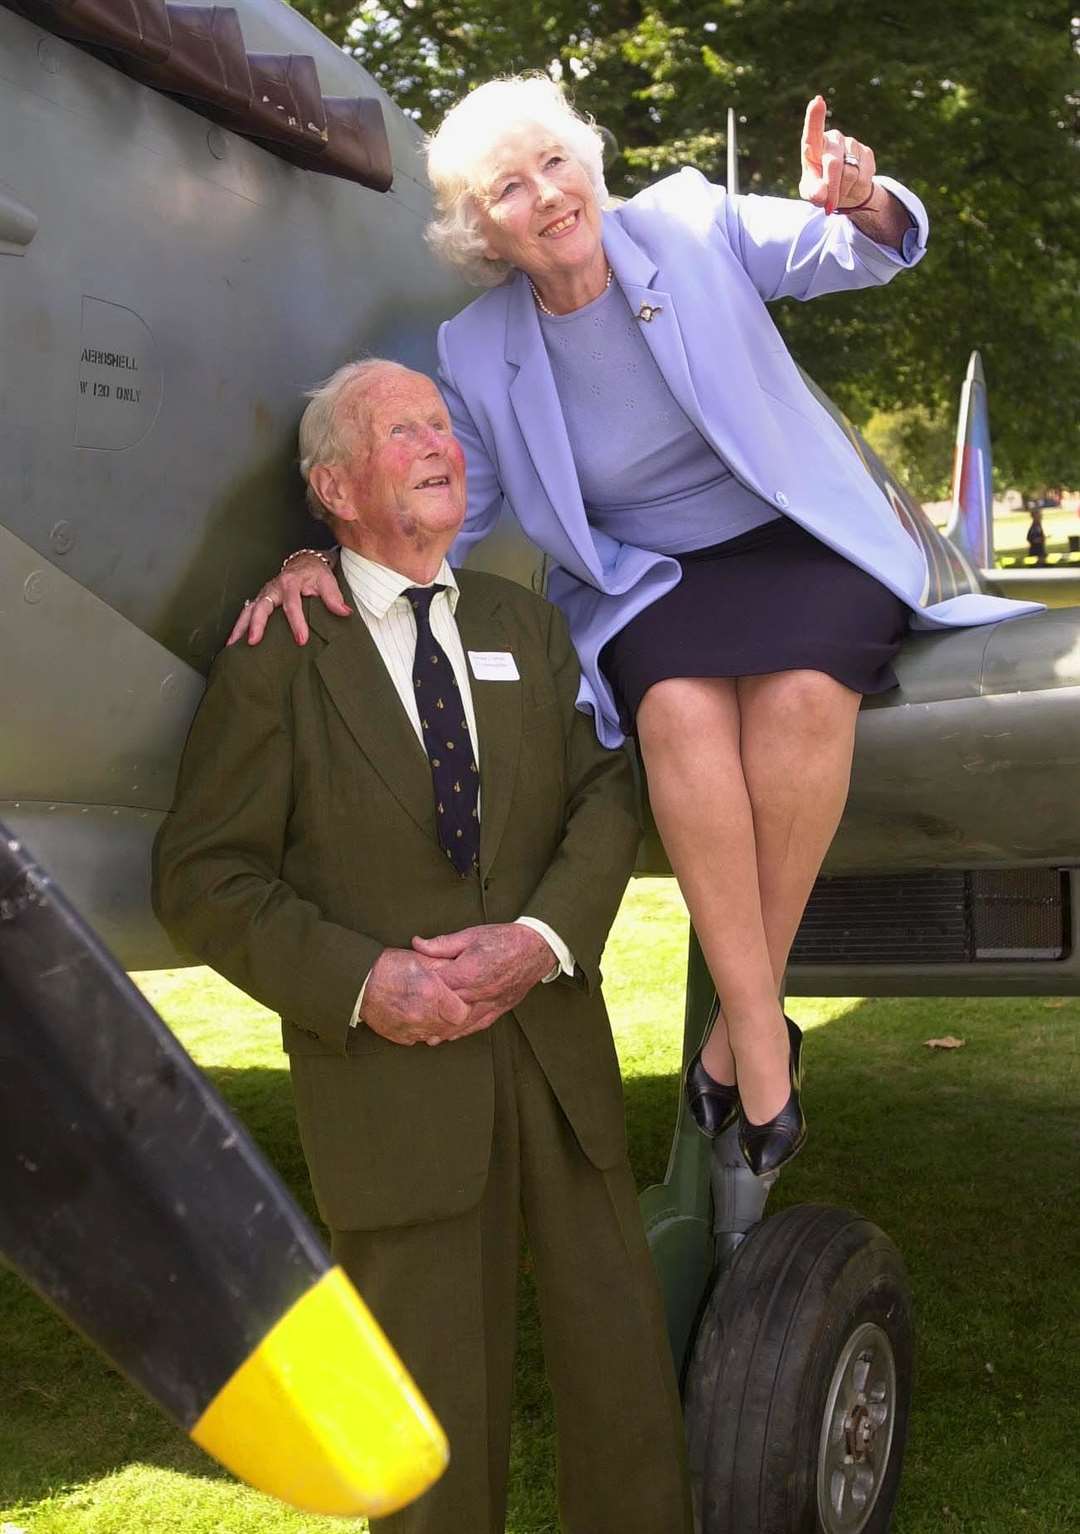 As part of the 60th anniversary of the Battle of Britain with Captain John (‘Cat’s Eyes’) Cunningham (PA)